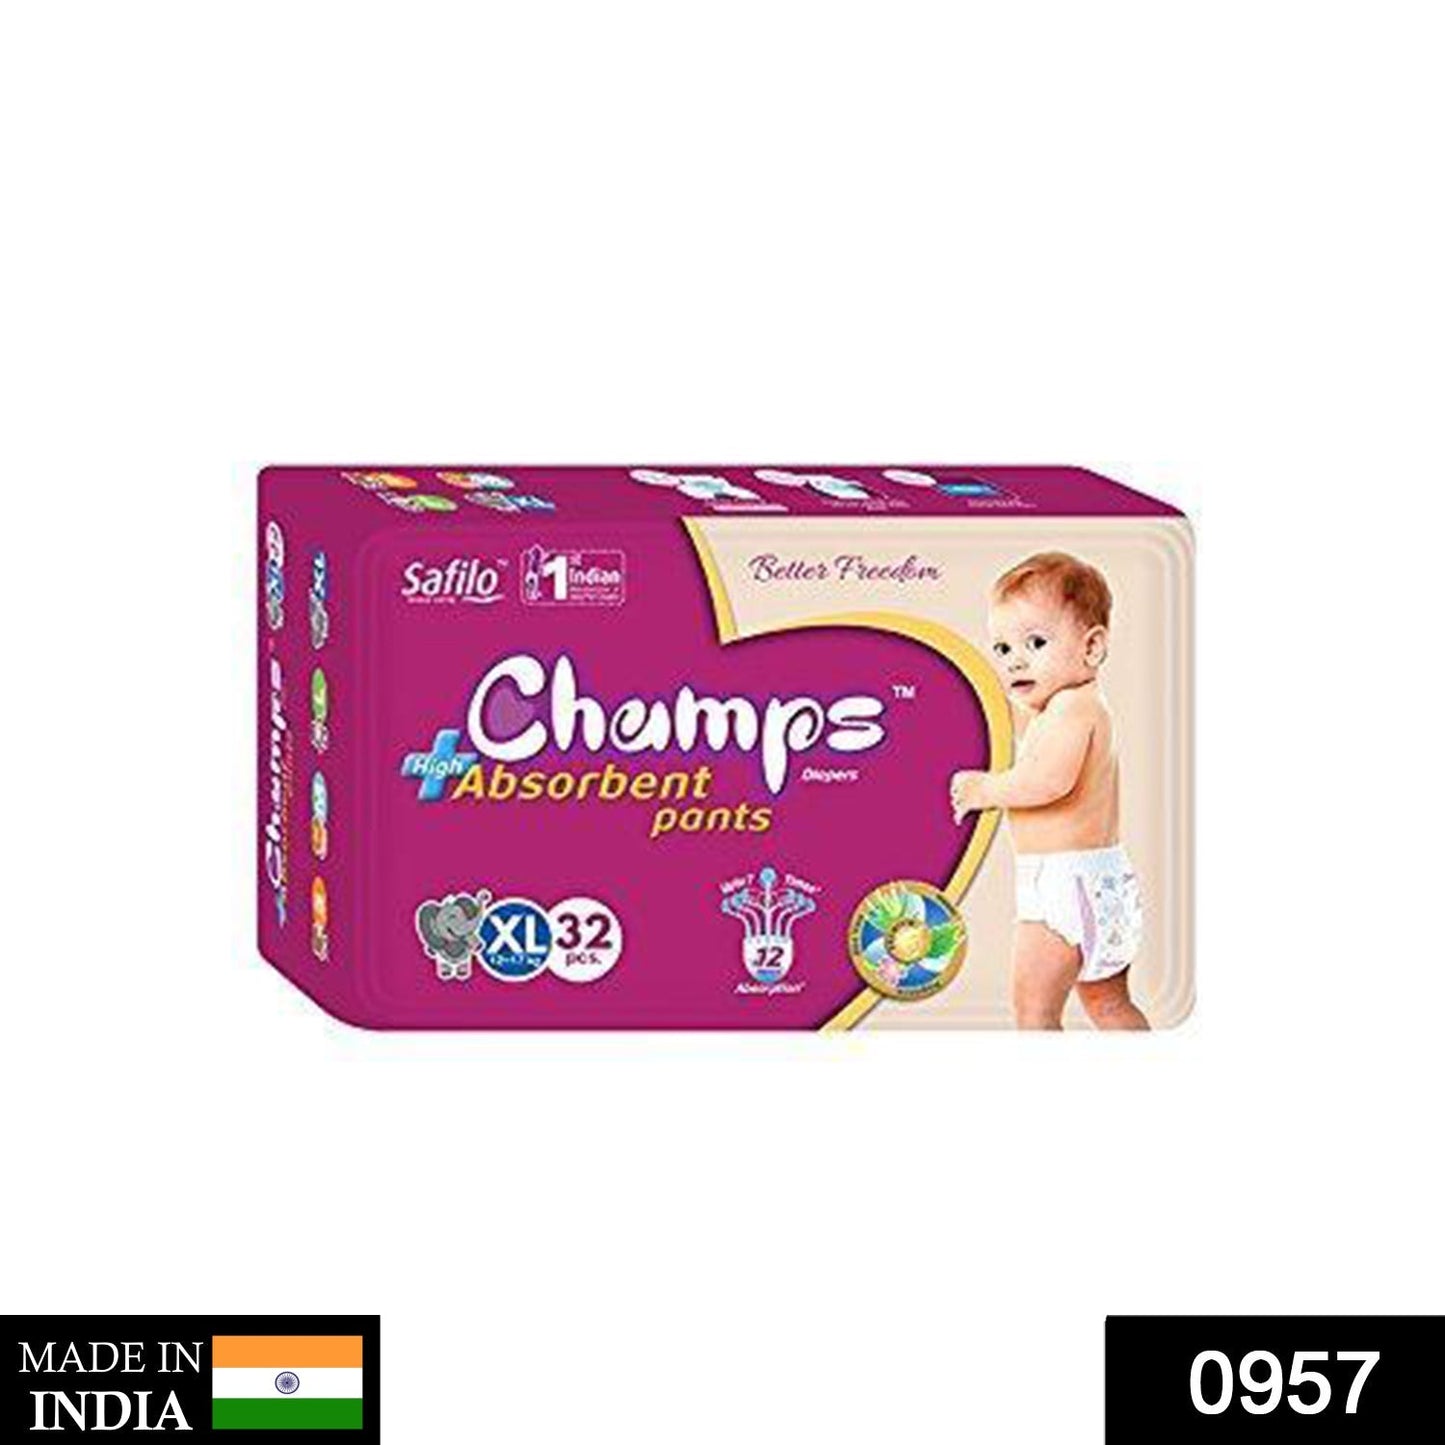 Premium Champs High Absorbent Pant Style Diaper Extra Large(XL) Size, 46 Pieces (957_XLarge_46) Champs